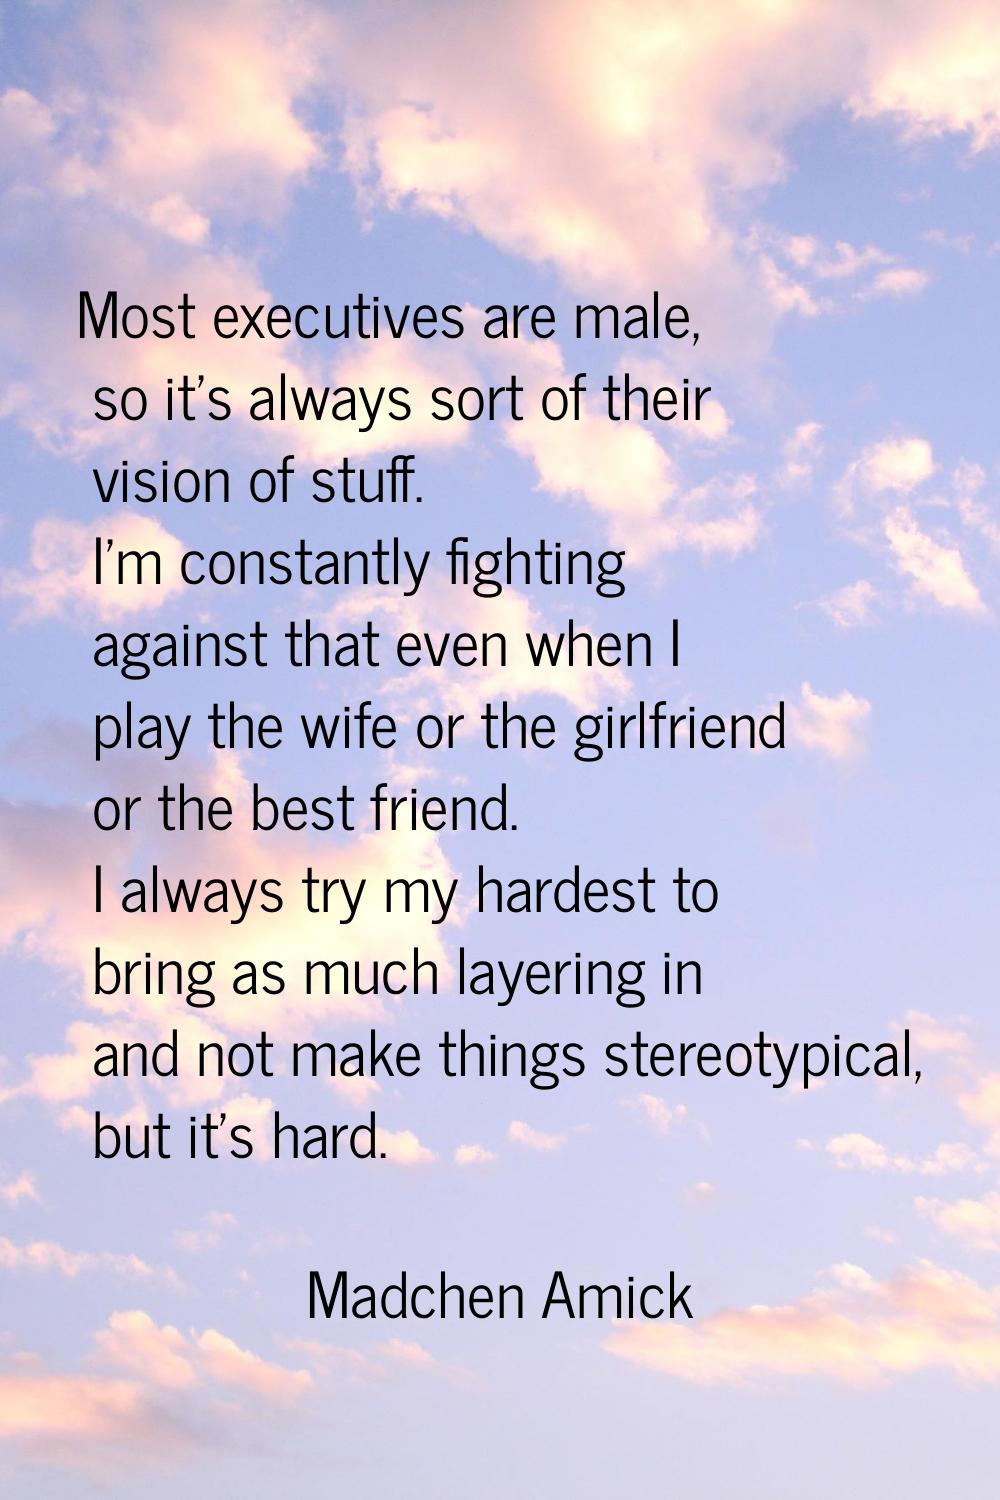 Most executives are male, so it's always sort of their vision of stuff. I'm constantly fighting aga